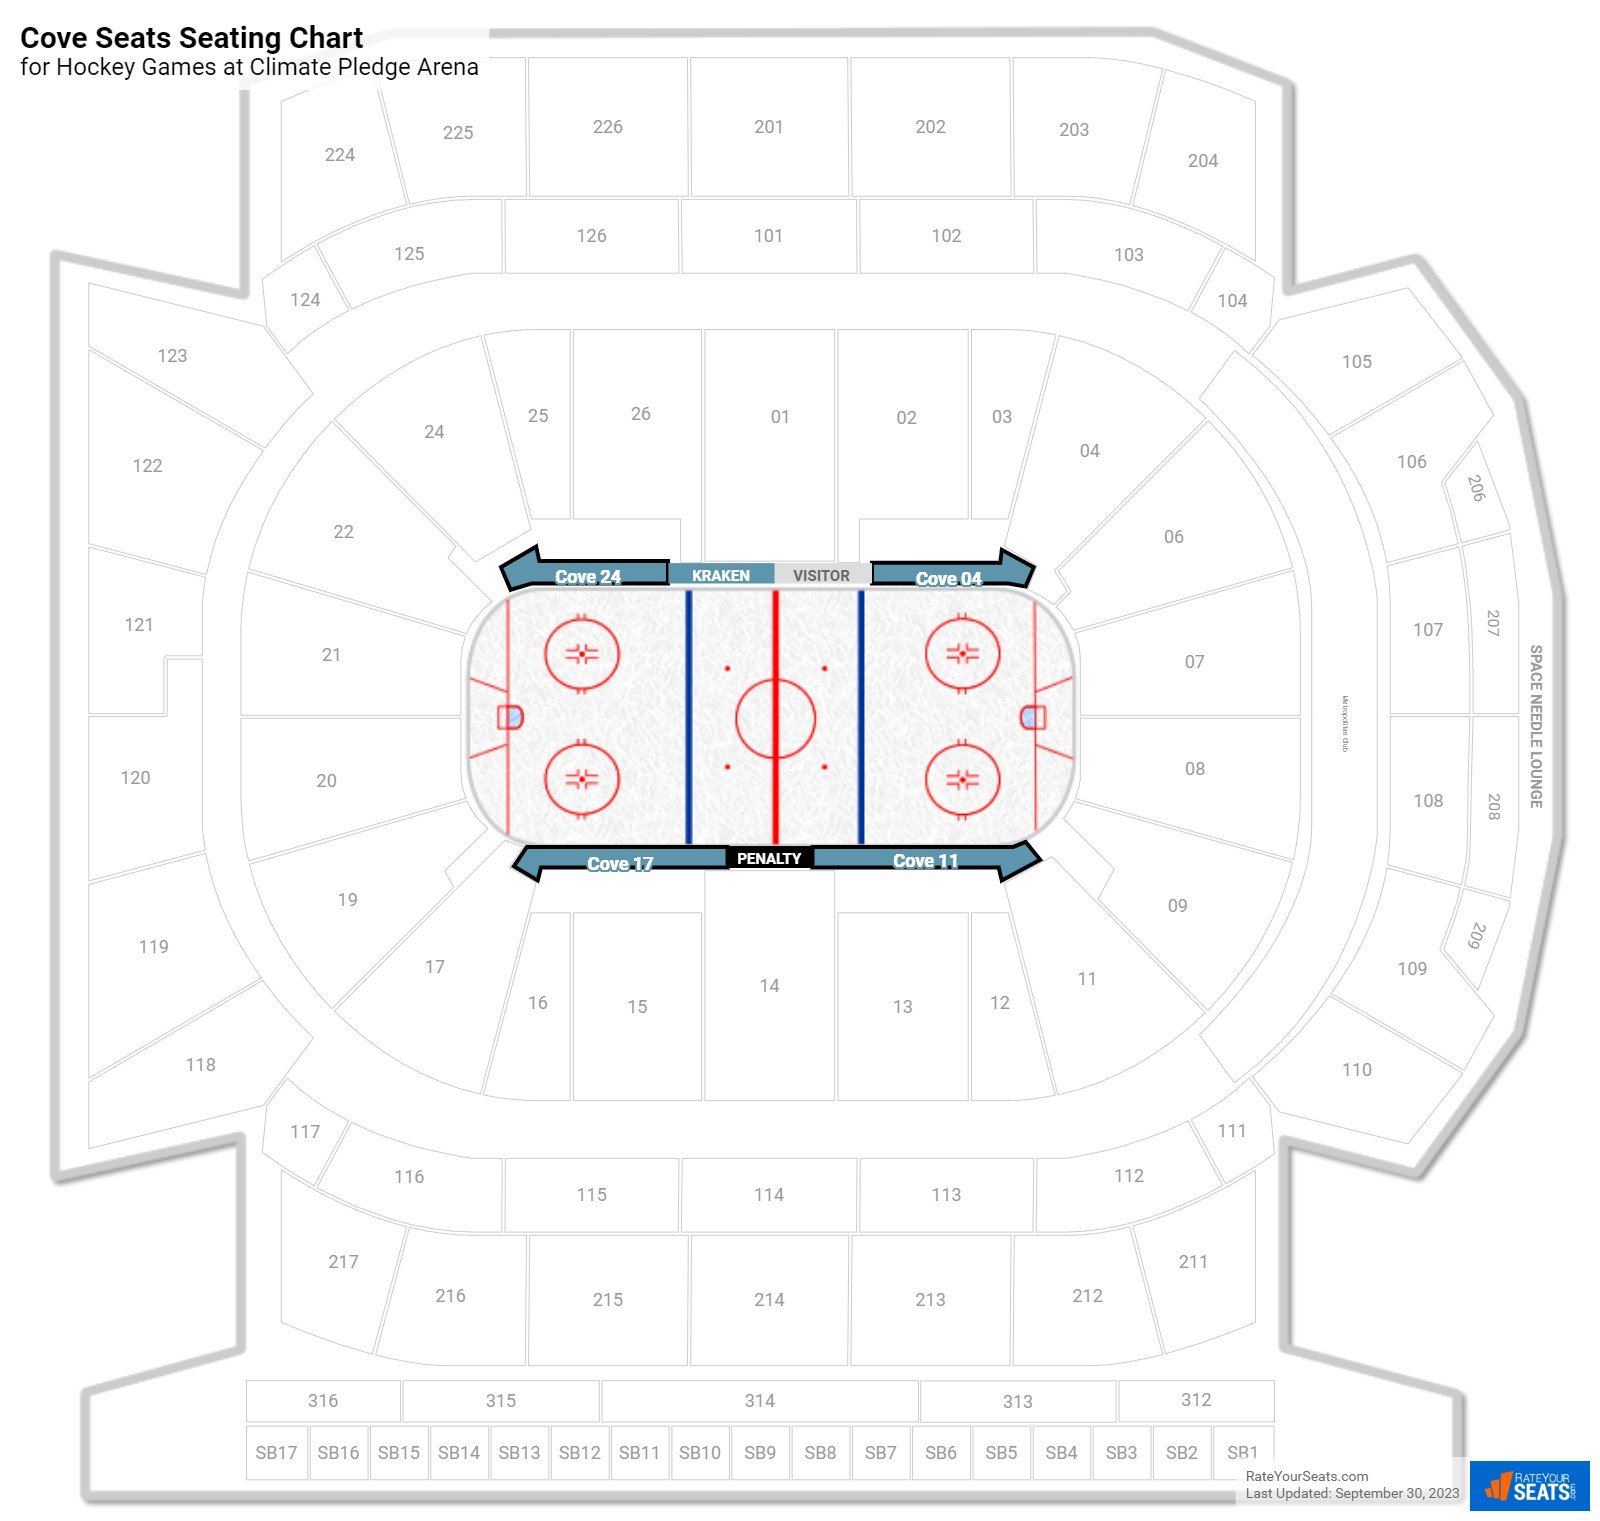 Hockey Cove Seats Seating Chart at Climate Pledge Arena